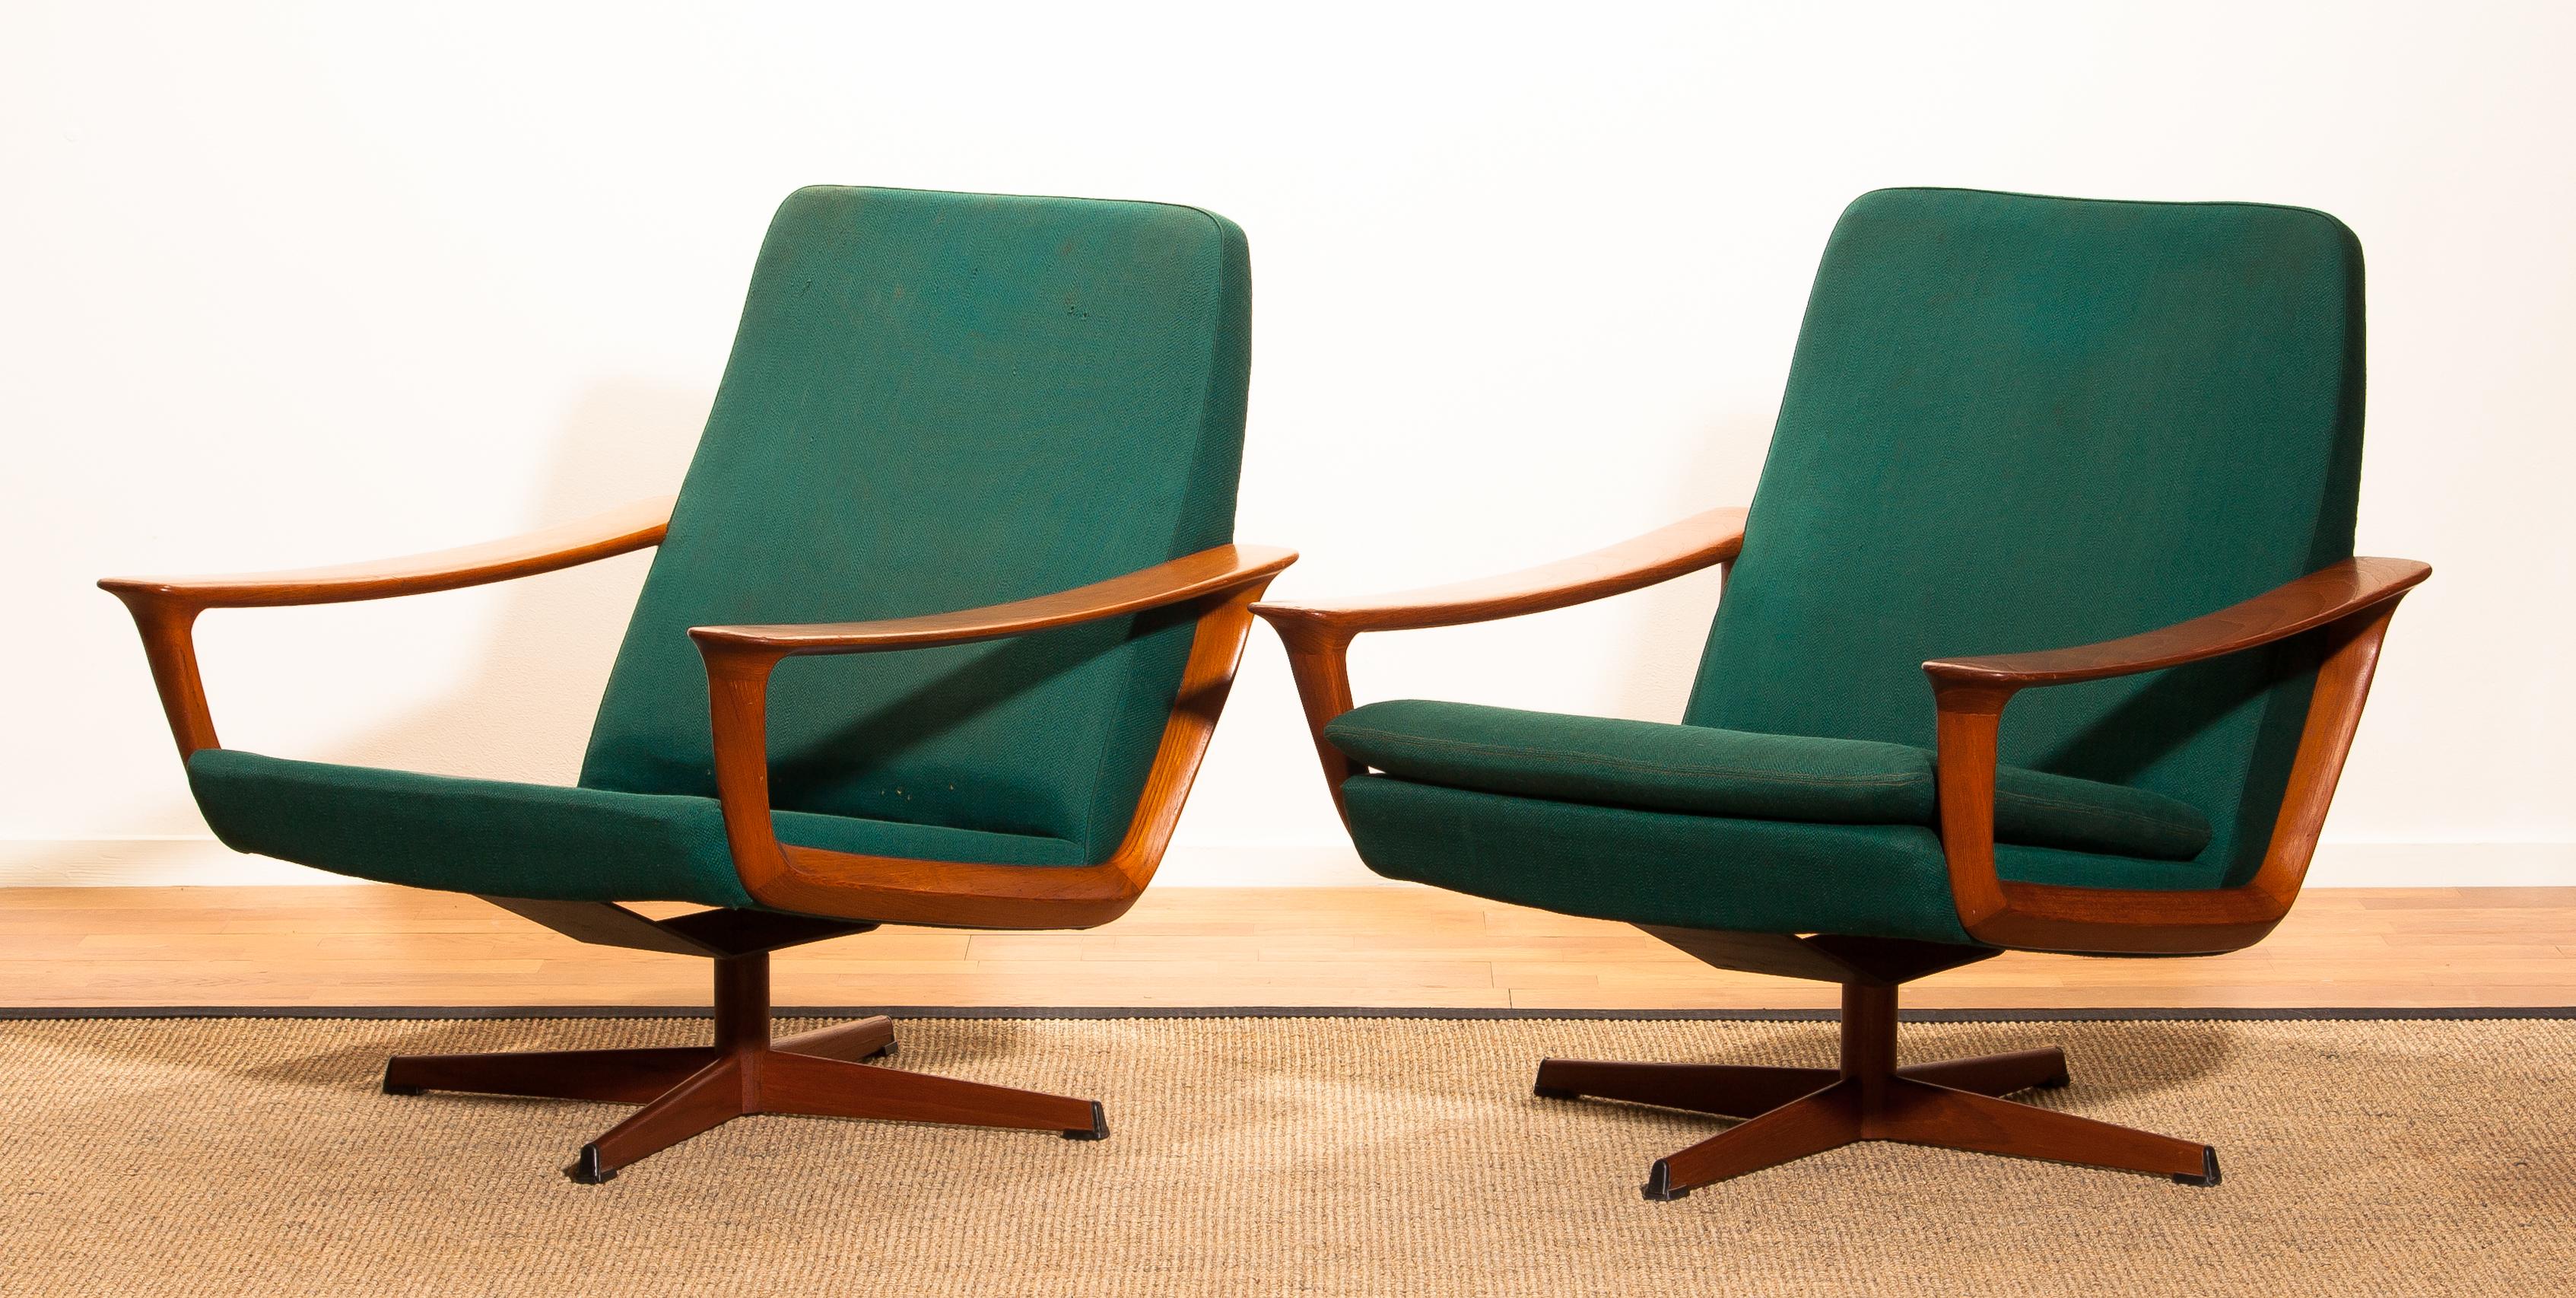 Mid-20th Century 1960s, Teak Set of Two Swivel Chairs by Johannes Andersson for Trensum Denmark